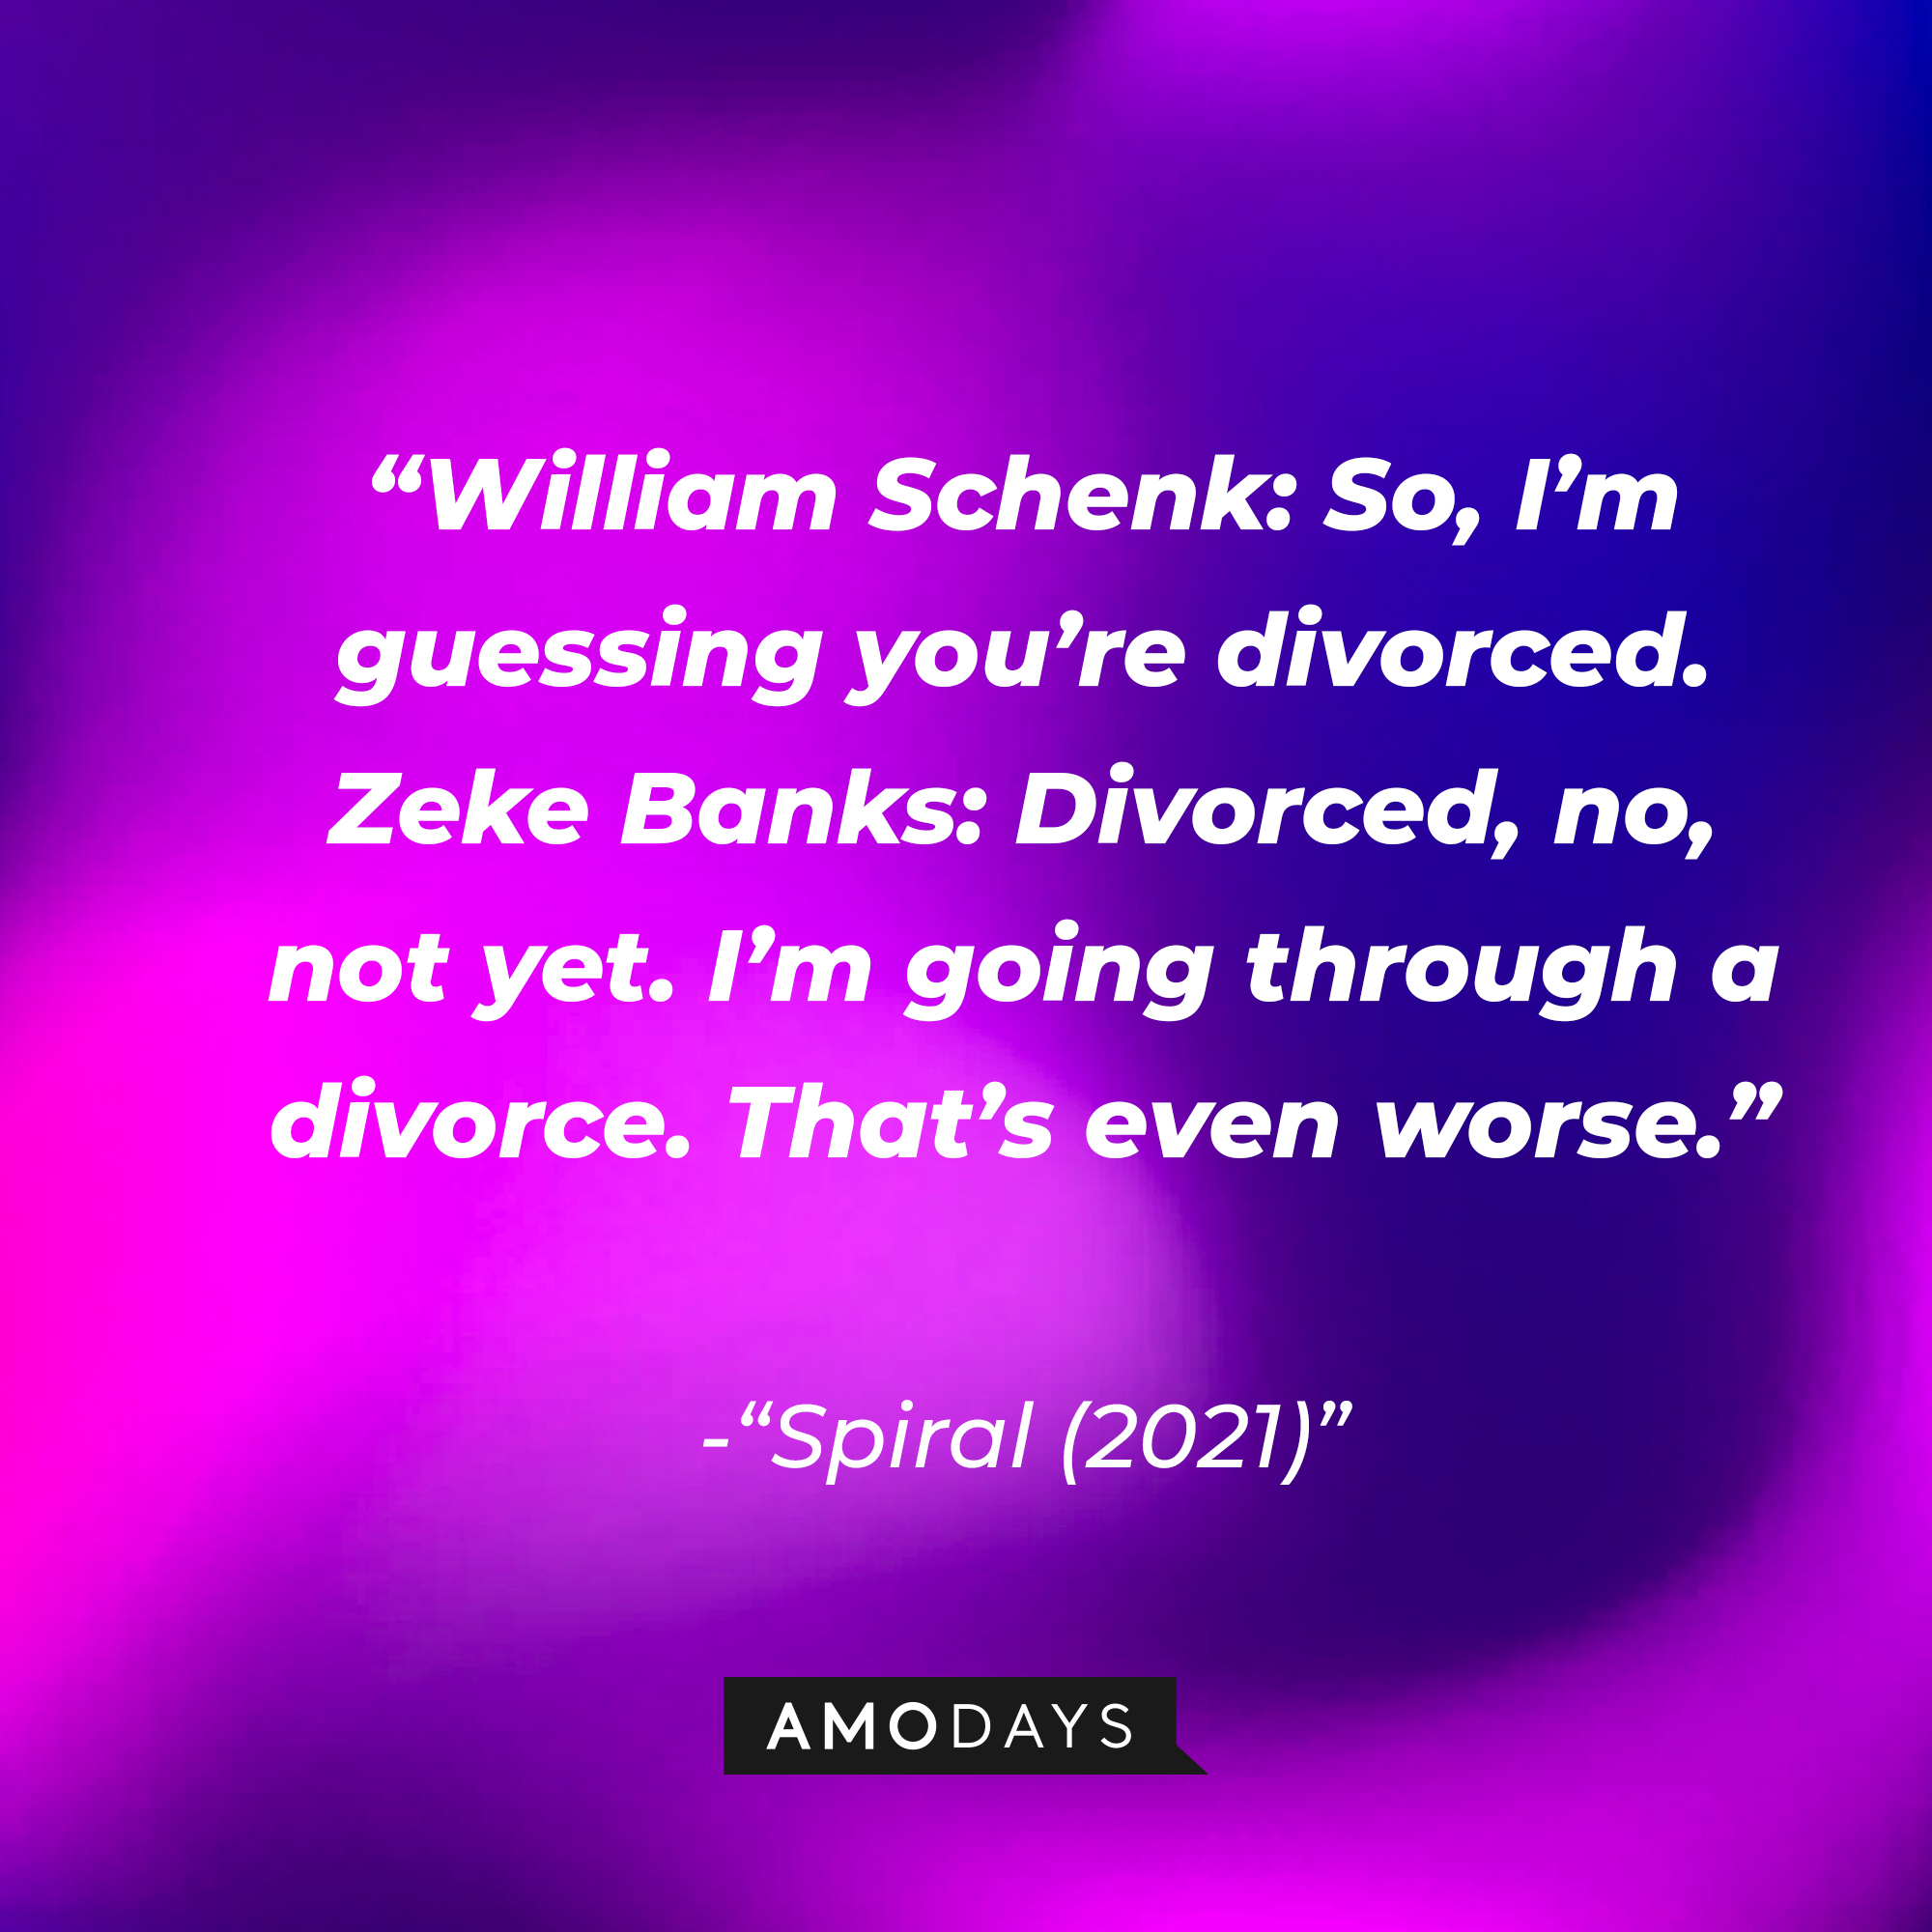 "Spiral (2021)" dialogue: “William Schenk: So, I’m guessing you’re divorced. Zeke Banks: Divorced, no, not yet. I’m going through a divorce. That’s even worse.” | Source: Amodays